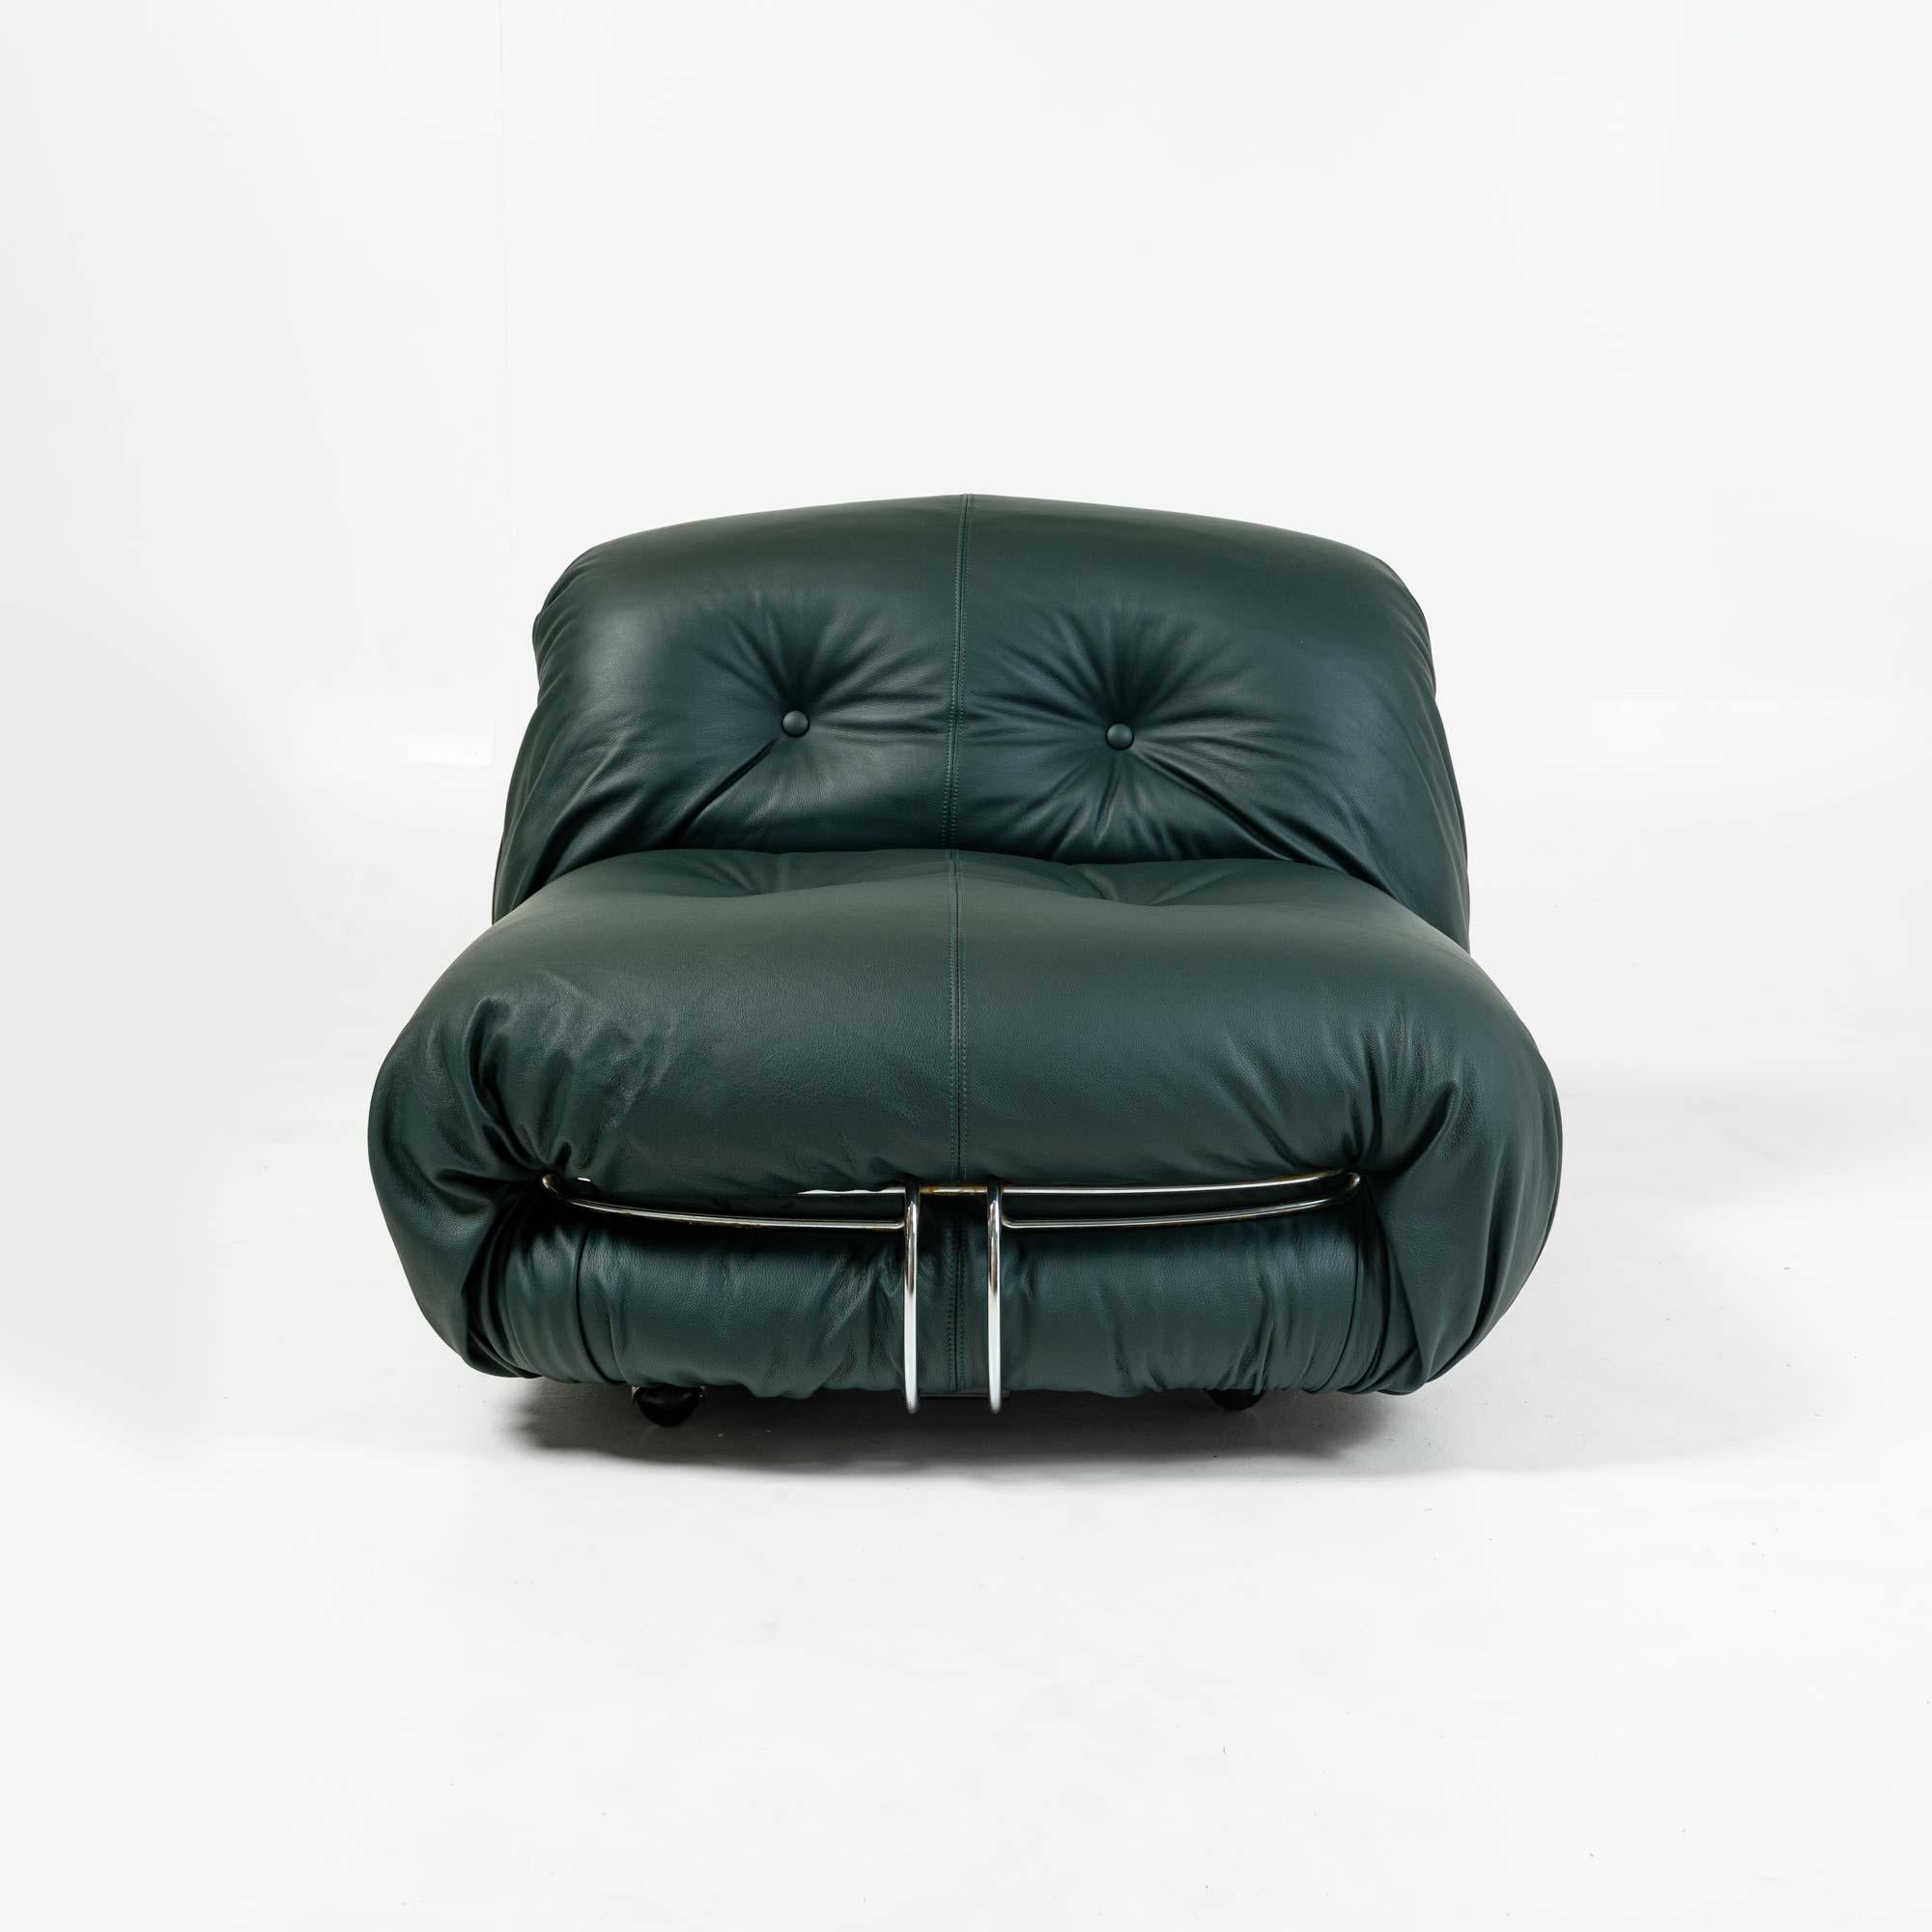 This is a rare Soriana Armchairs in recently reupholstered in Elmo Midnight Green Leather, designed by Afra and Tobia Scarpa and manufactured by Cassina in 1970s. The leather is soft and subtle. Each chair retains original two front casters as well